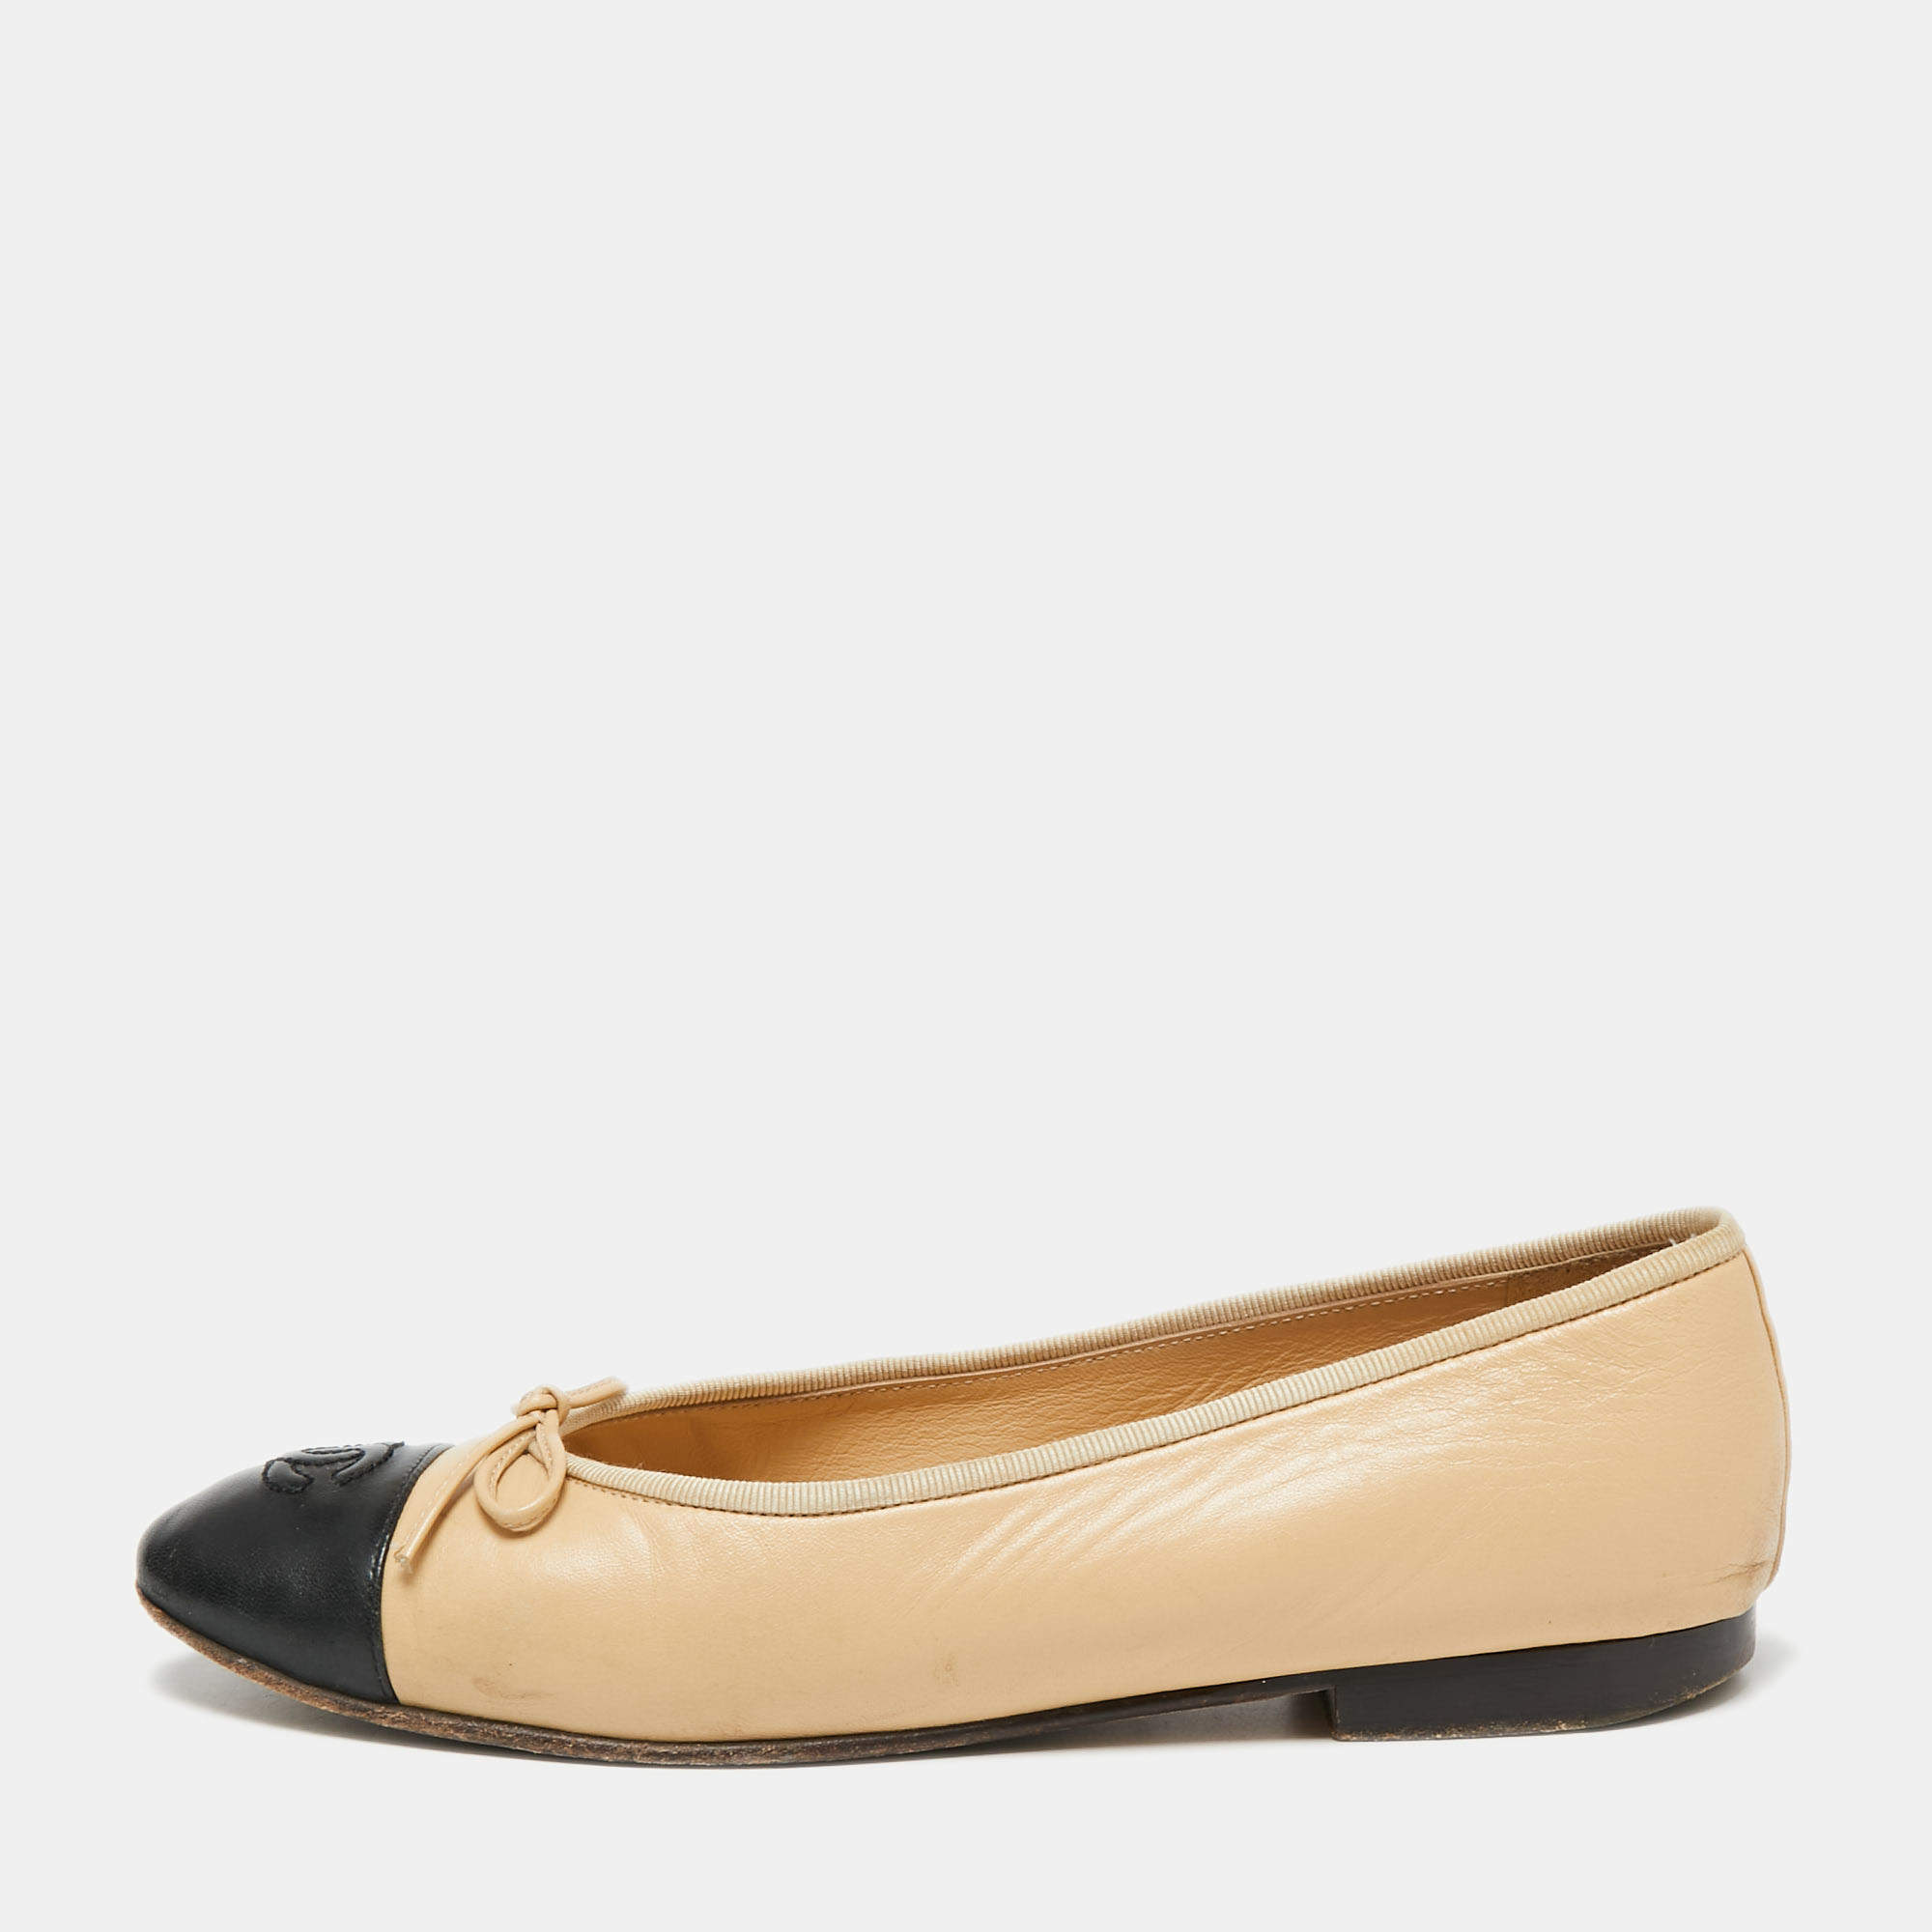 CHANEL, Shoes, Chanel Ballerina Flat Beige And Black